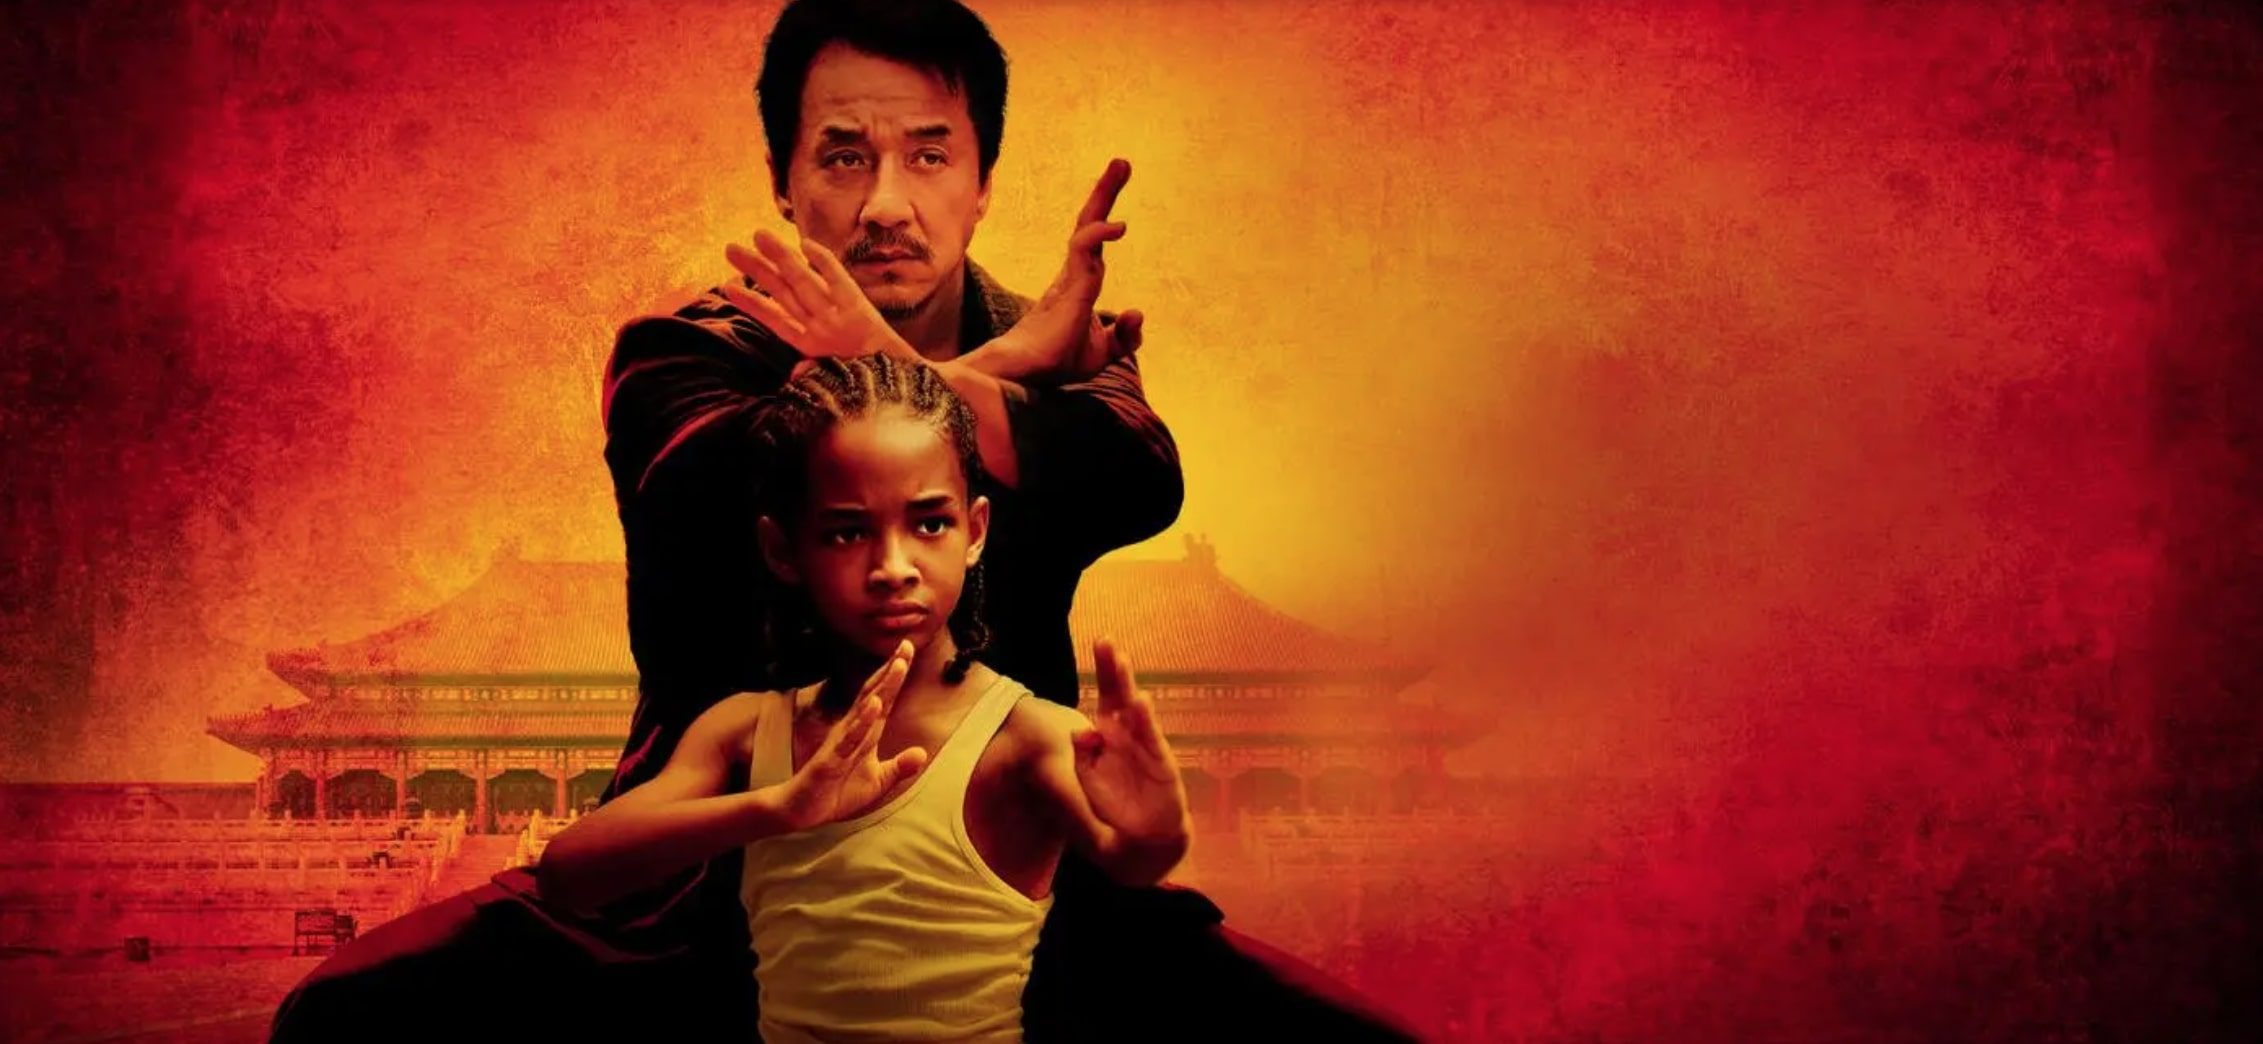 'Karate Kid' Casting Call Receives Over 10,000 Submissions After One Day